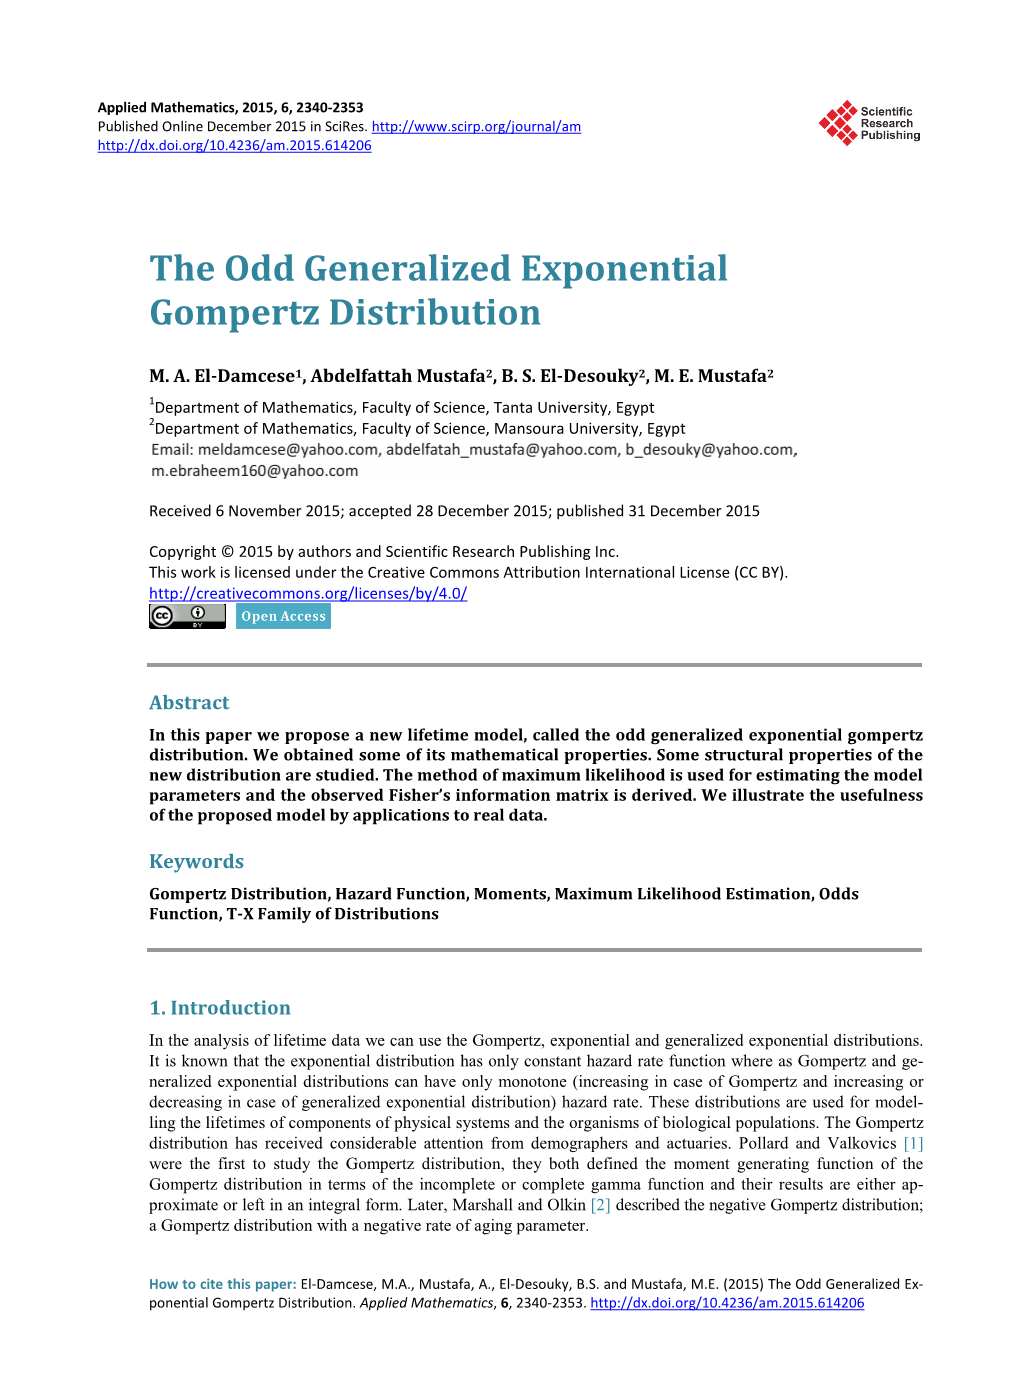 The Odd Generalized Exponential Gompertz Distribution